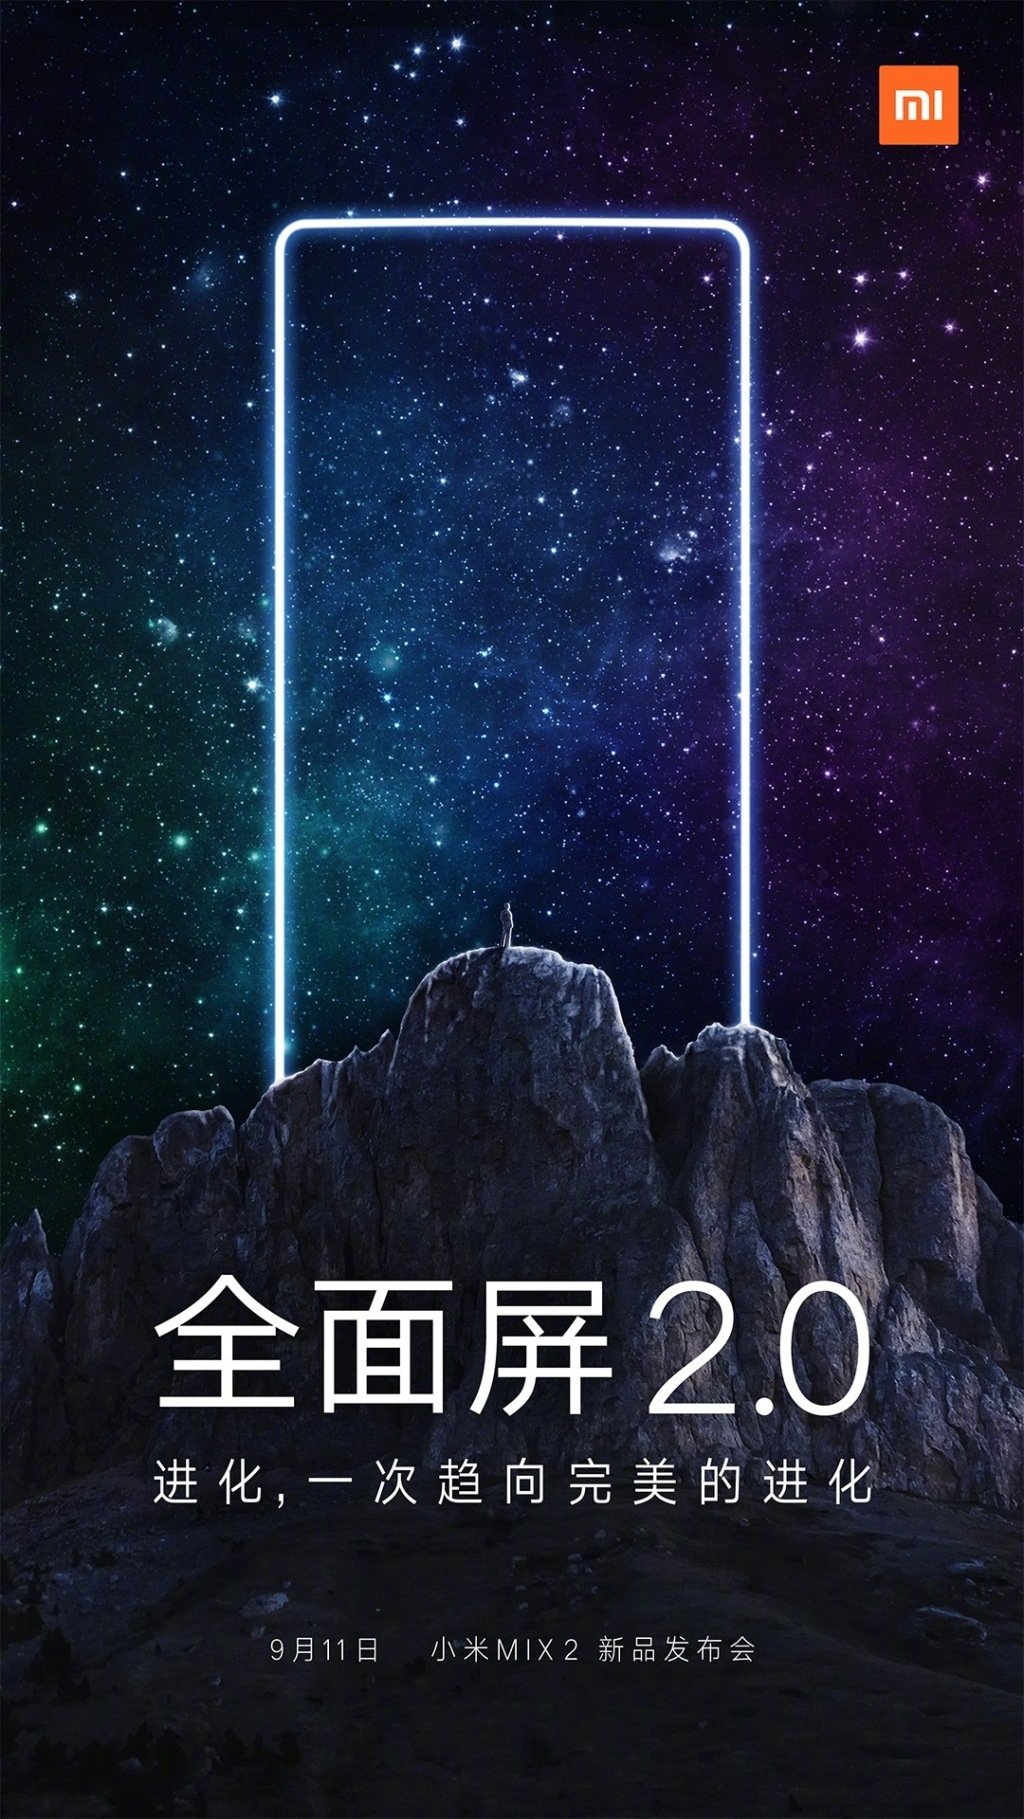 mi mix2 will be revealed on 11th sept 01